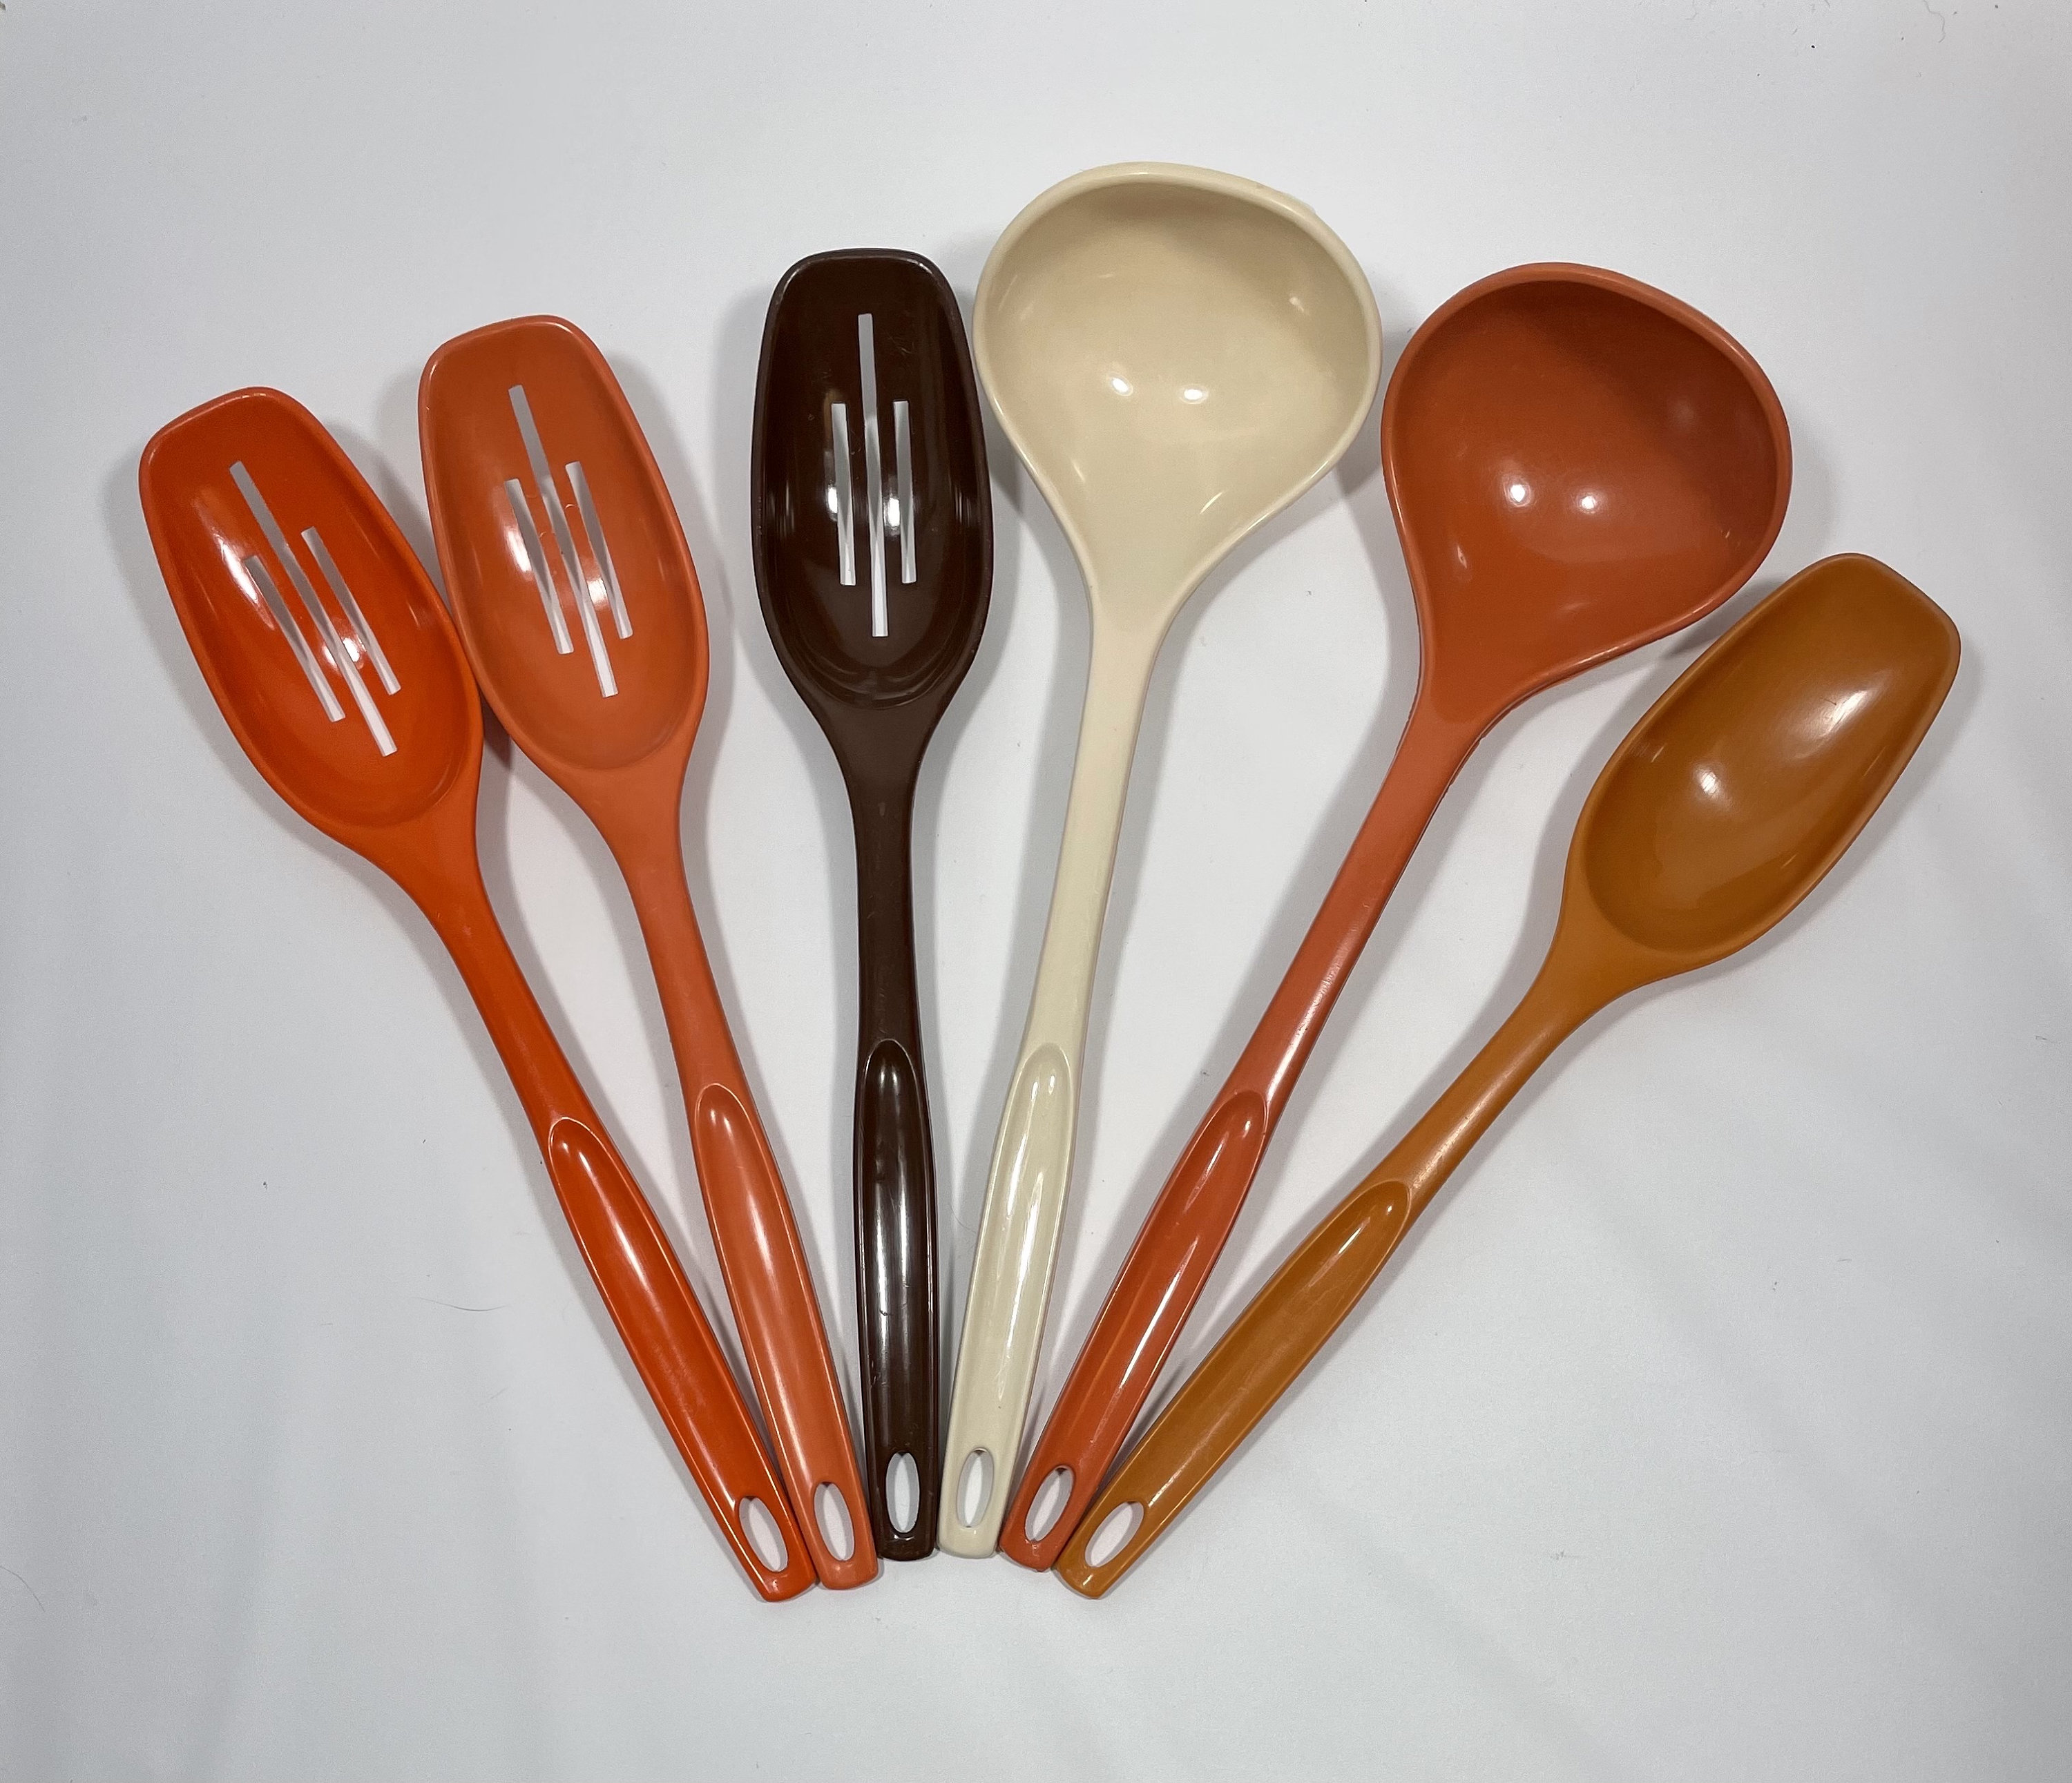 Assorted Plastic Nylon Kitchen Utensils Vintage Slotted Spoon Spatula/ flipper Ladles Your Choice of Cooking Utensils 